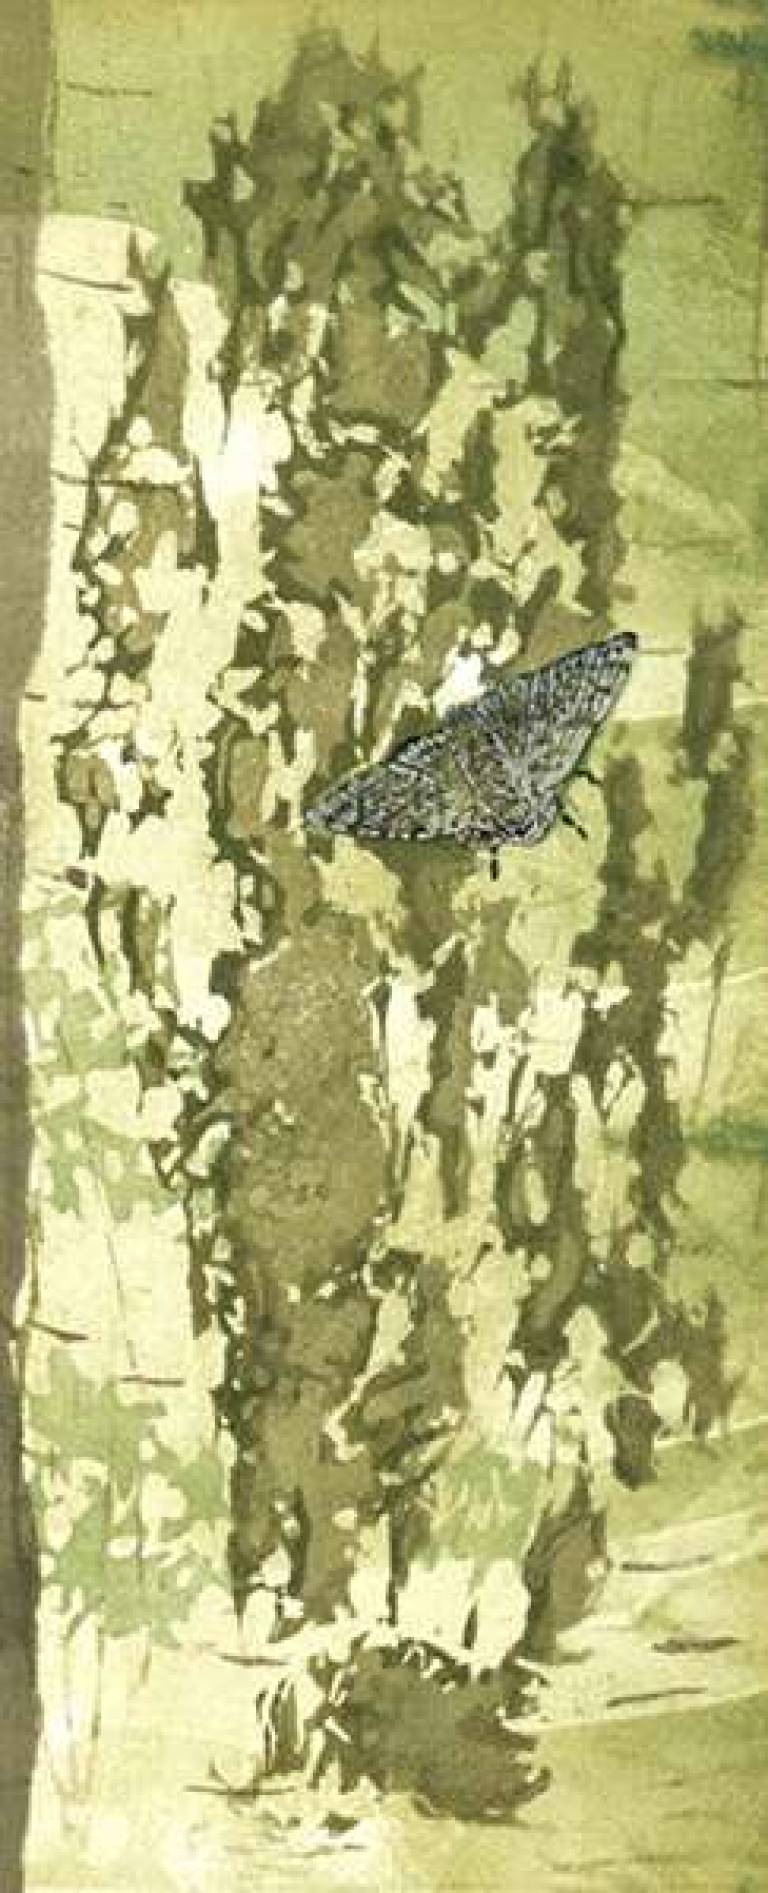 Overlooked (Peppered Moth on Birch) - Thelma Sykes